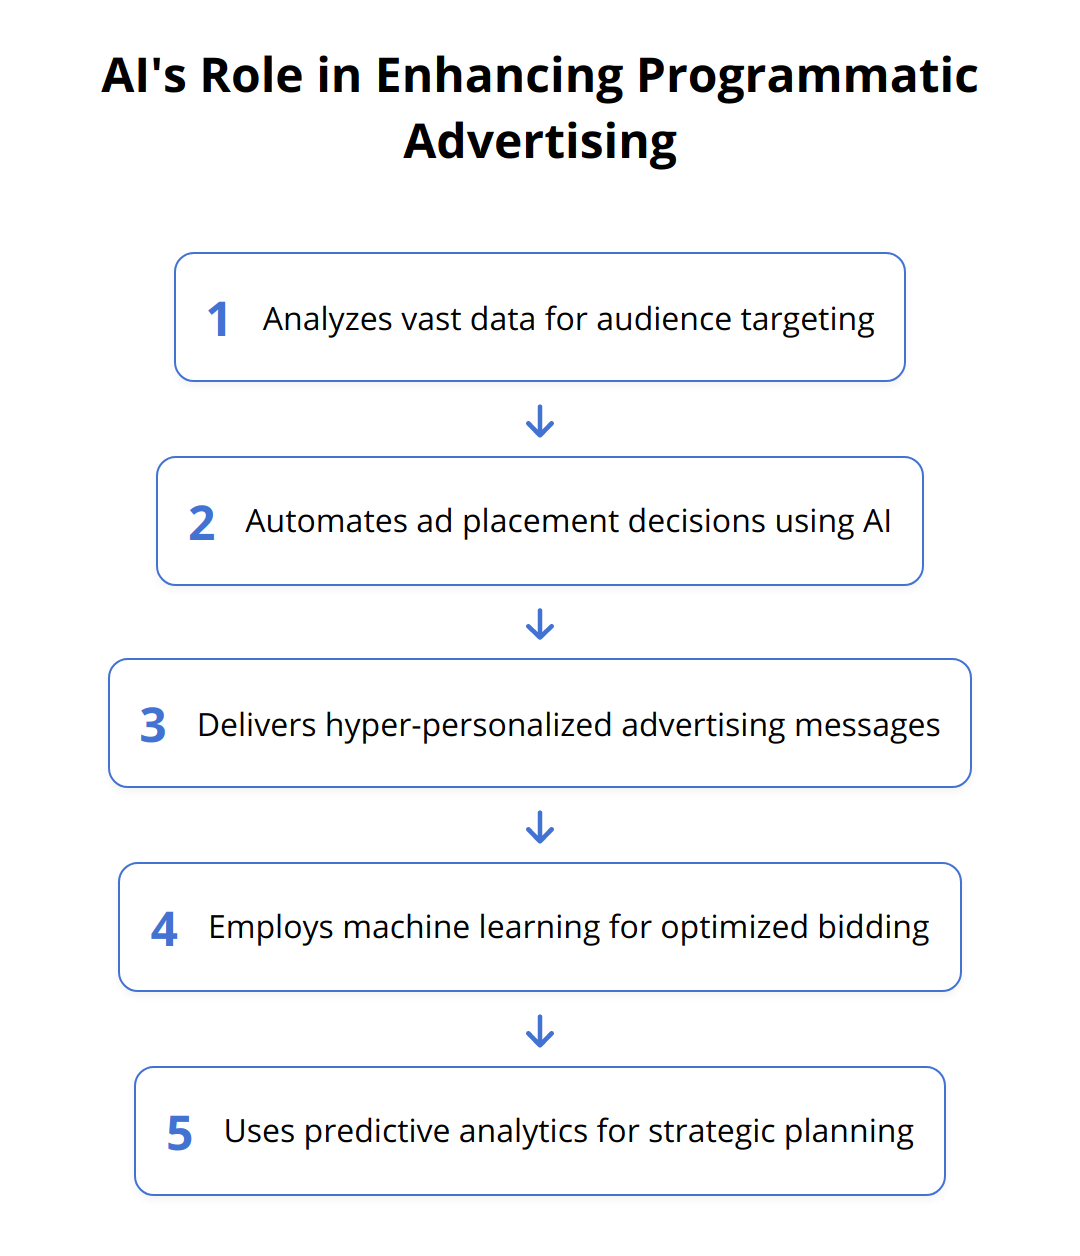 Flow Chart - AI's Role in Enhancing Programmatic Advertising